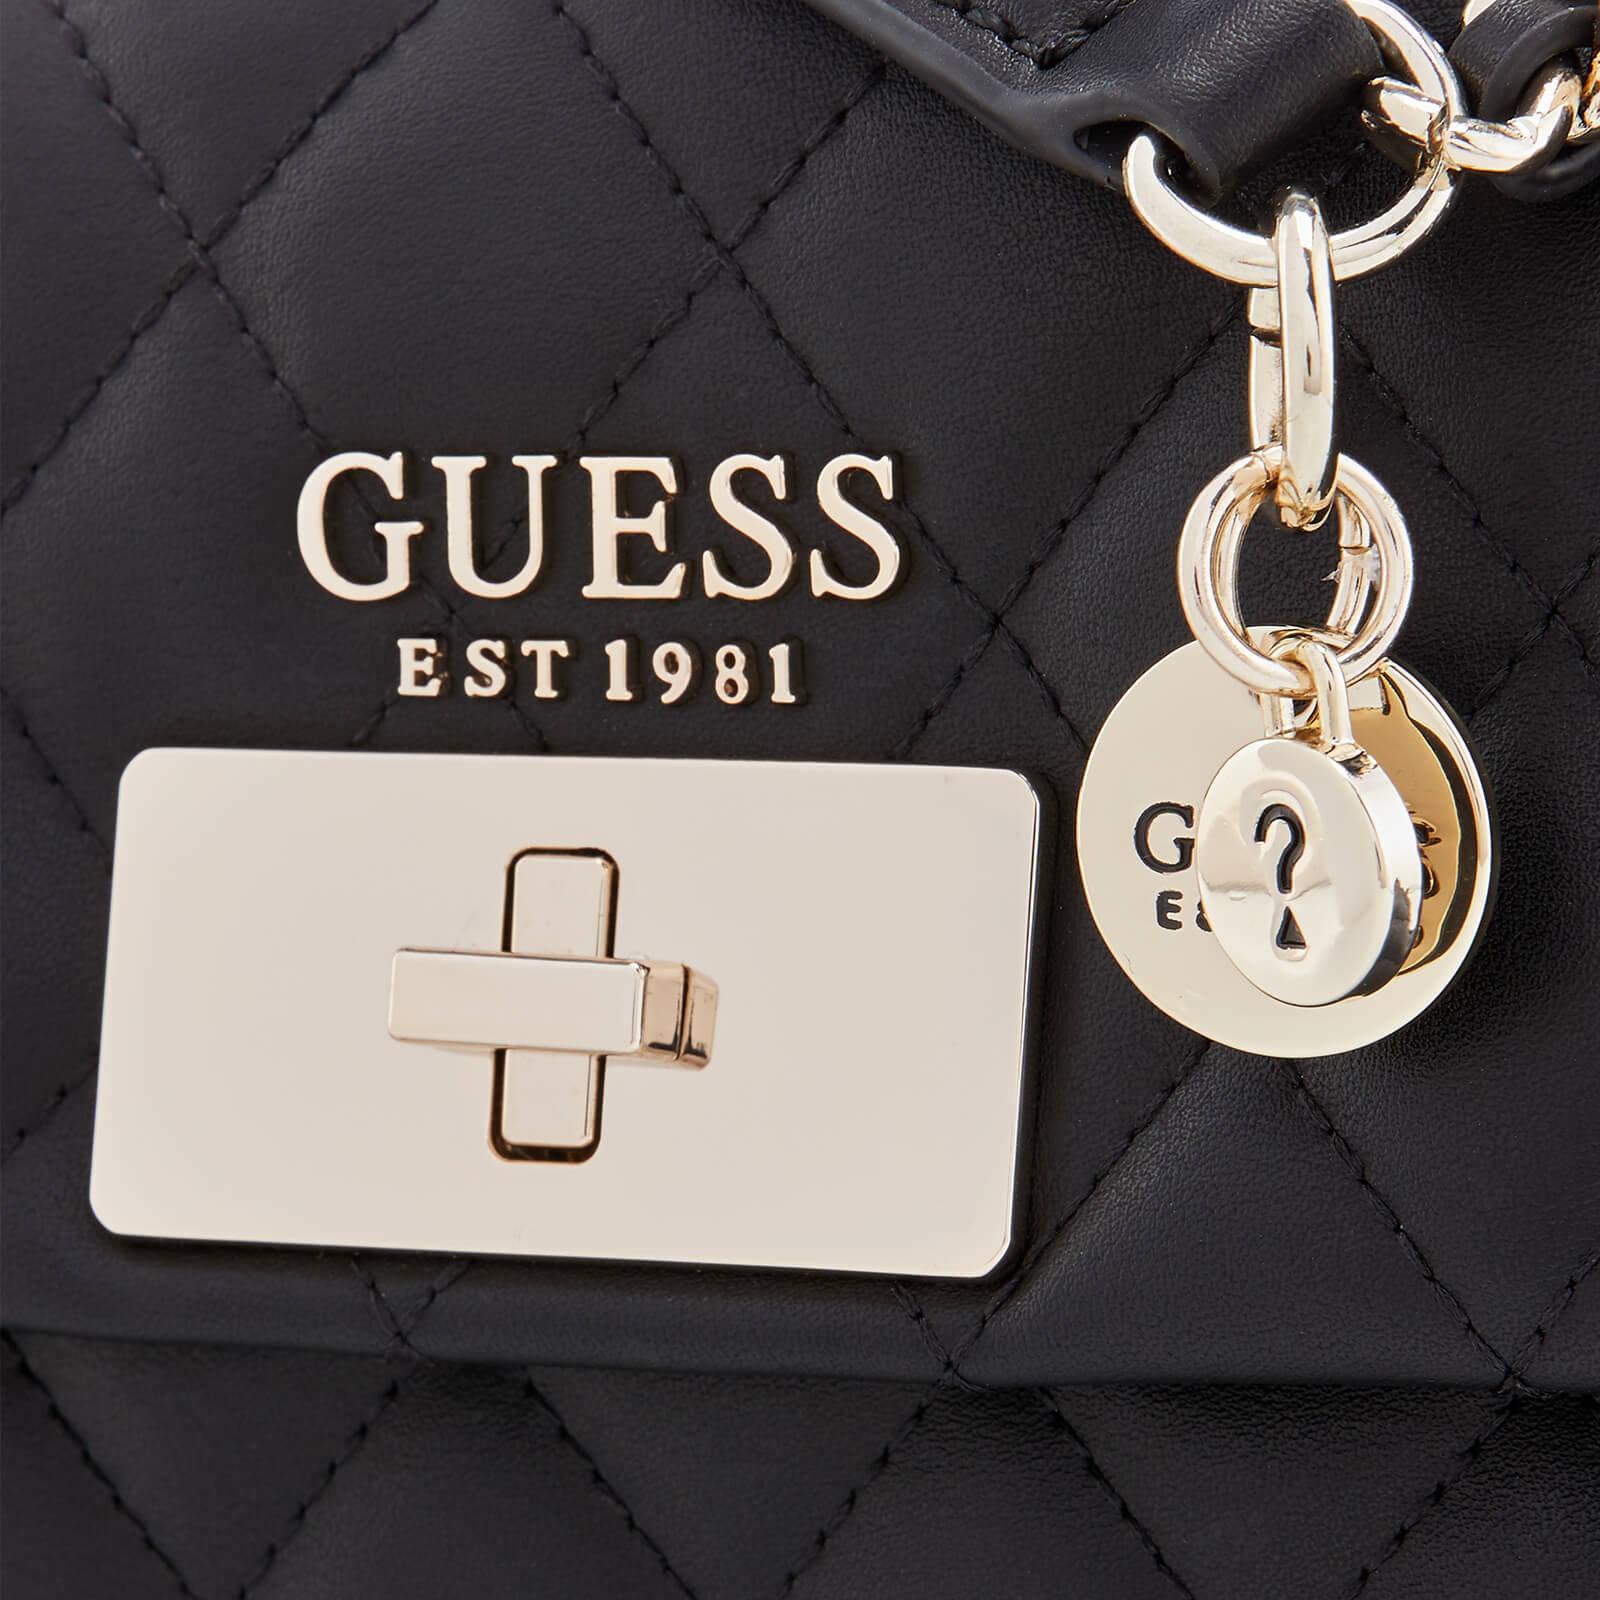 Guess Sweet Candy Convertible Cross Body Bag in Black - Lyst